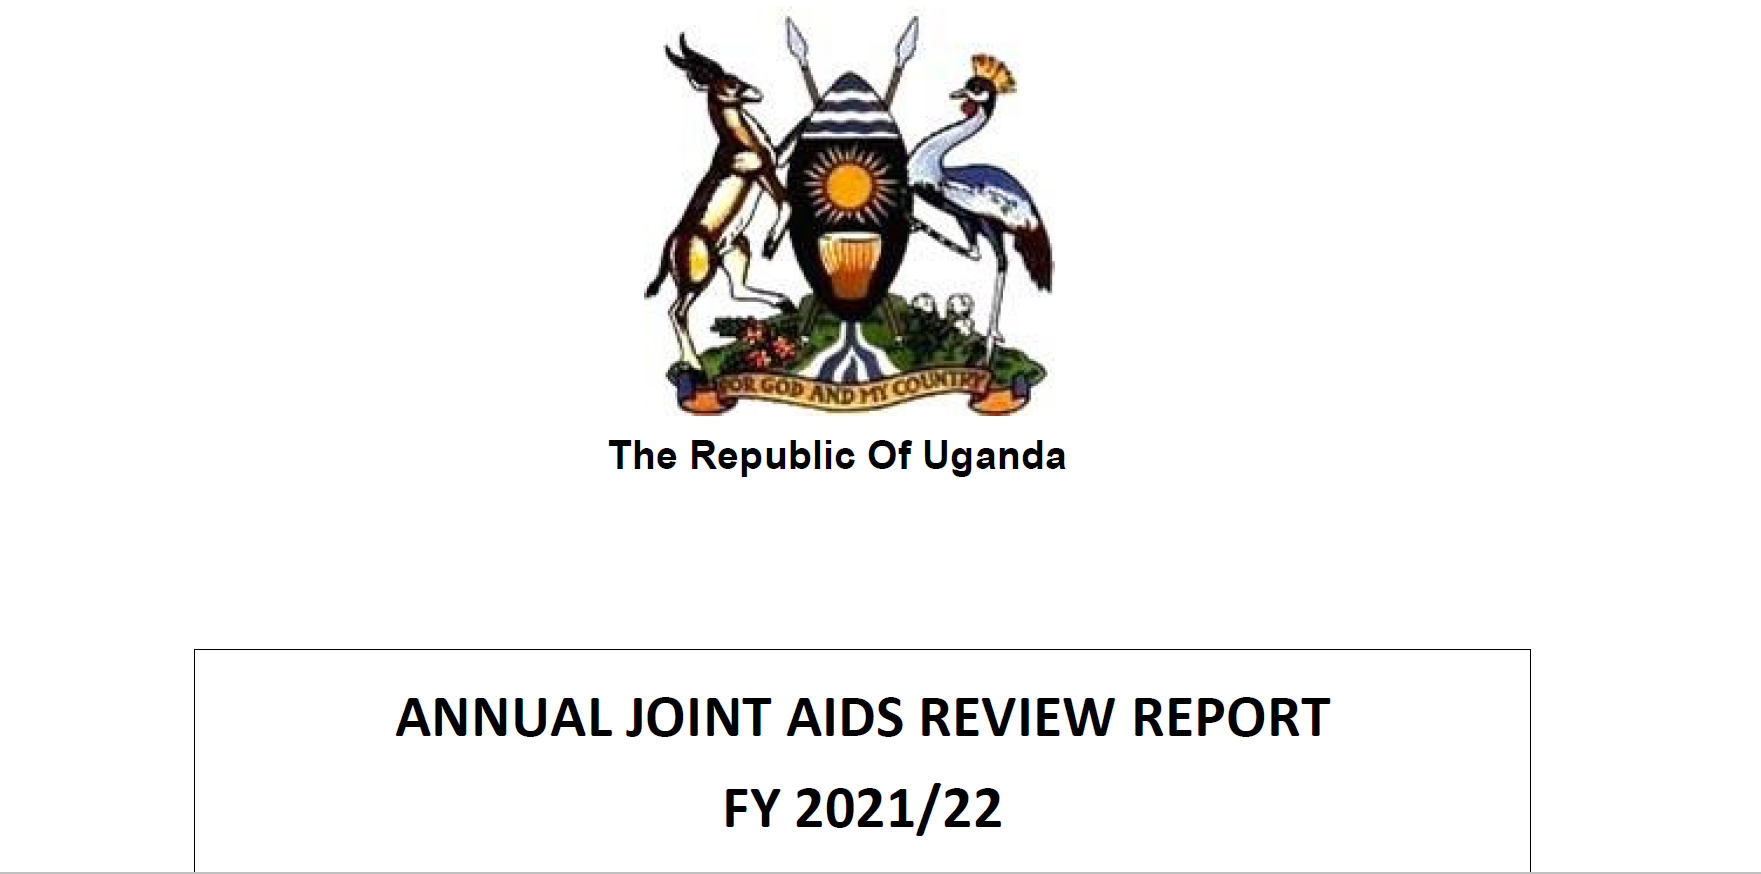 ANNUAL JOINT AIDS REVIEW REPORT  FY 2021/22